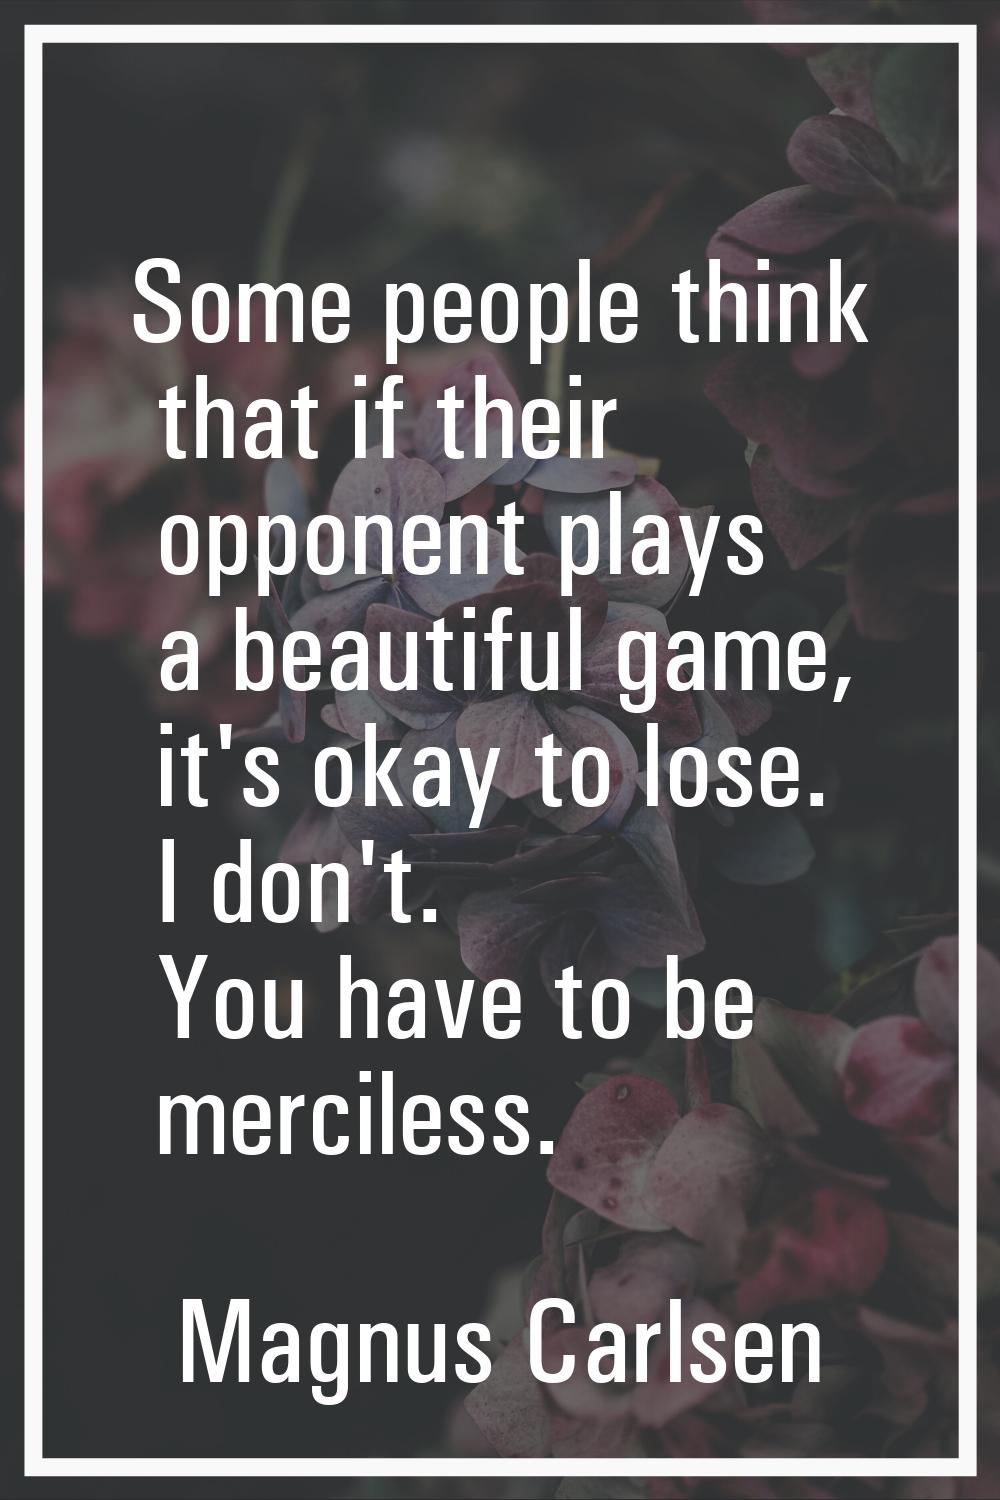 Some people think that if their opponent plays a beautiful game, it's okay to lose. I don't. You ha